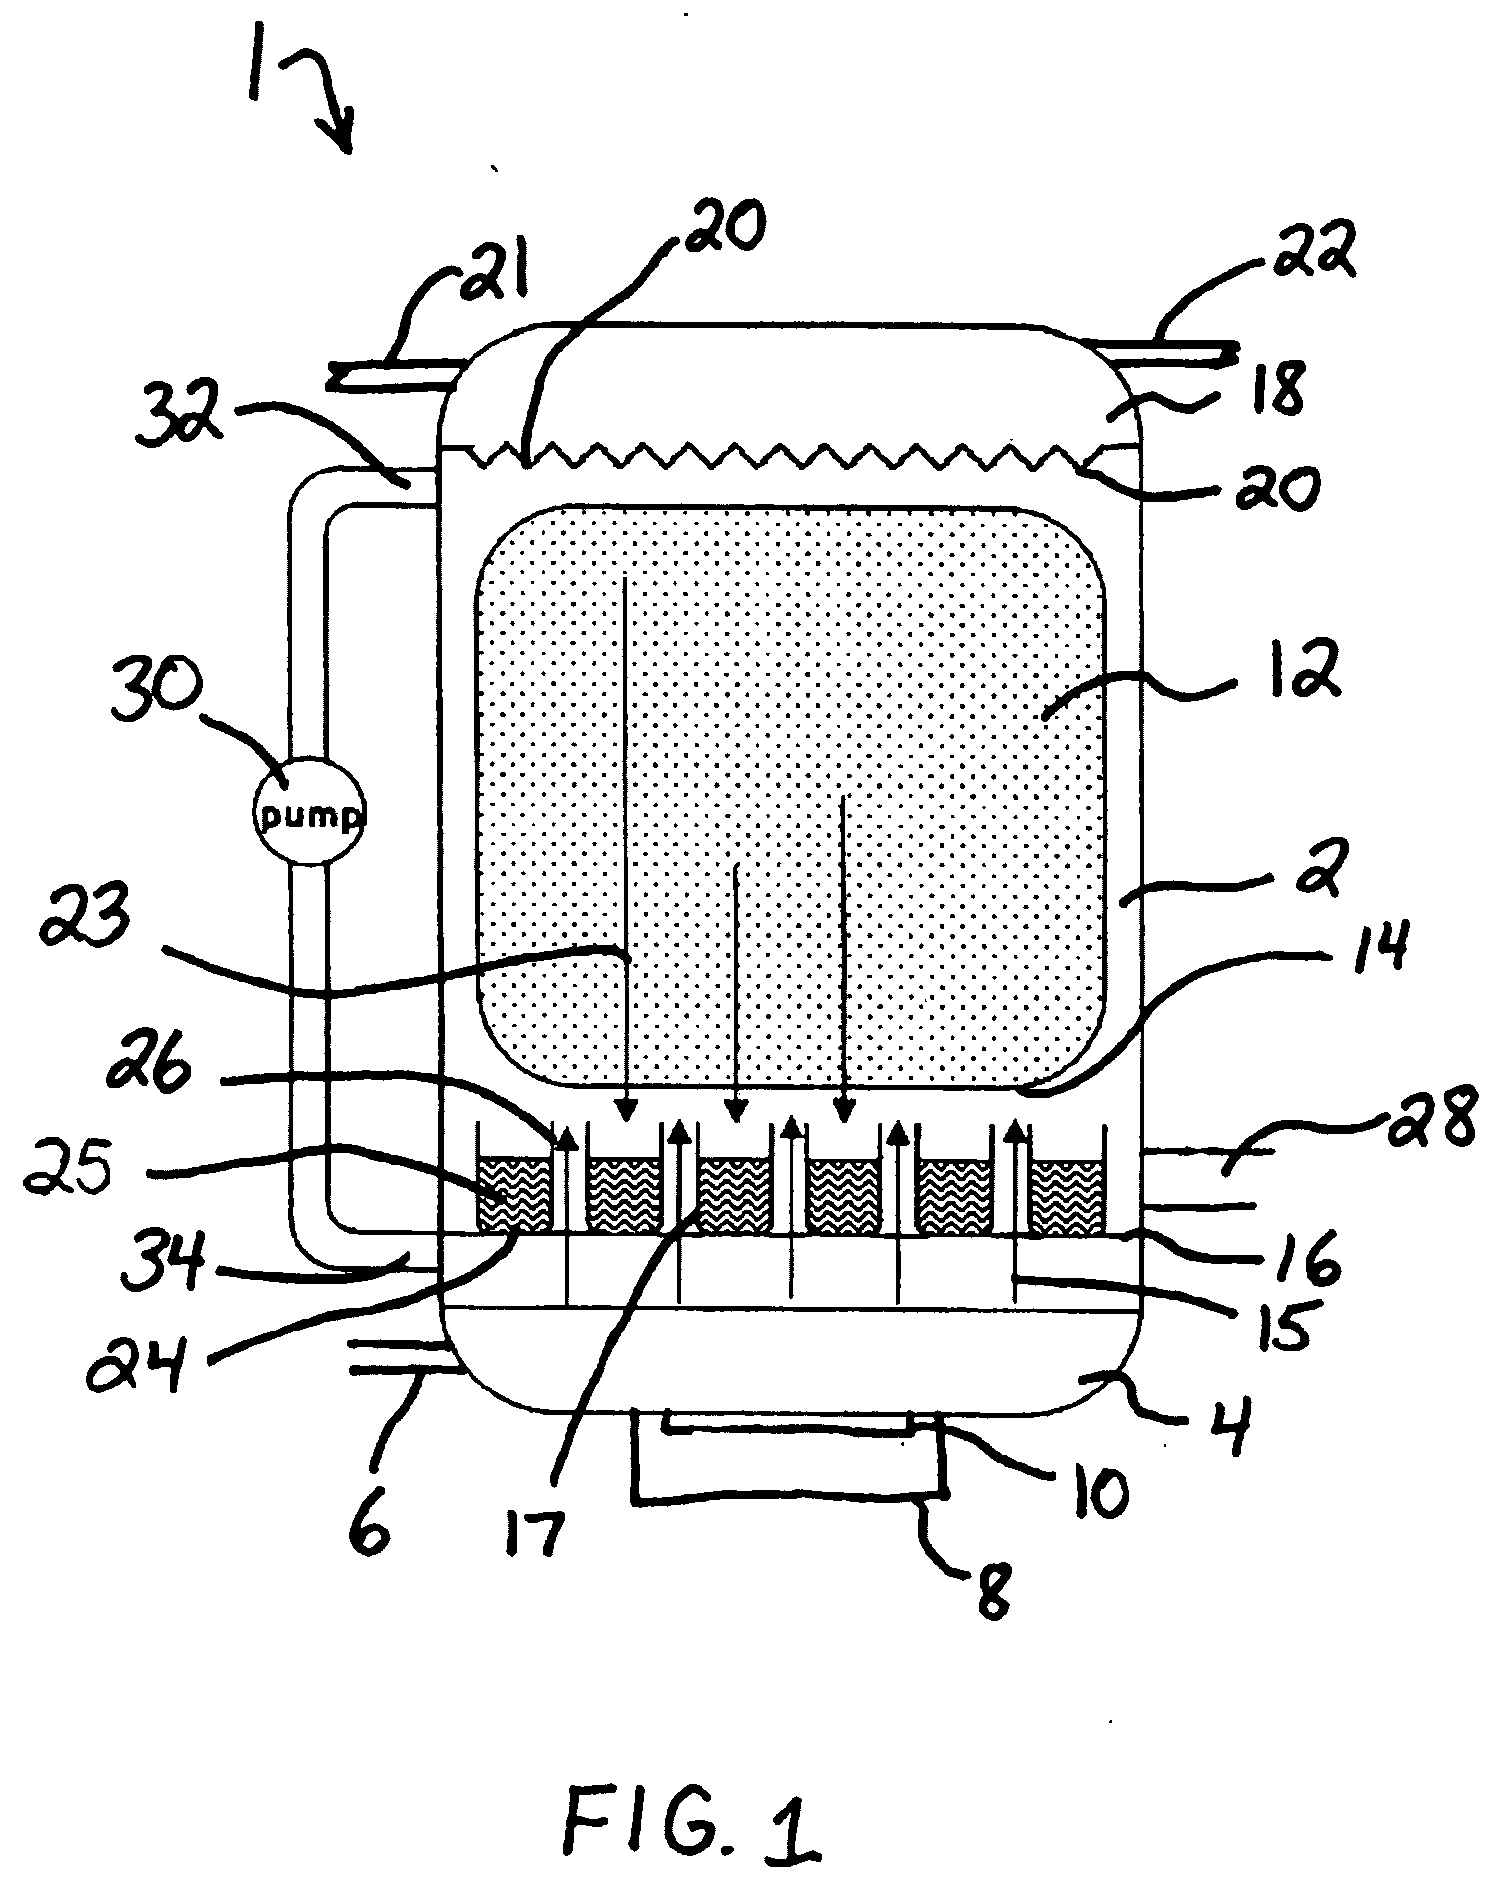 Apparatus and method for recovering rare-earth and noble metals from an article